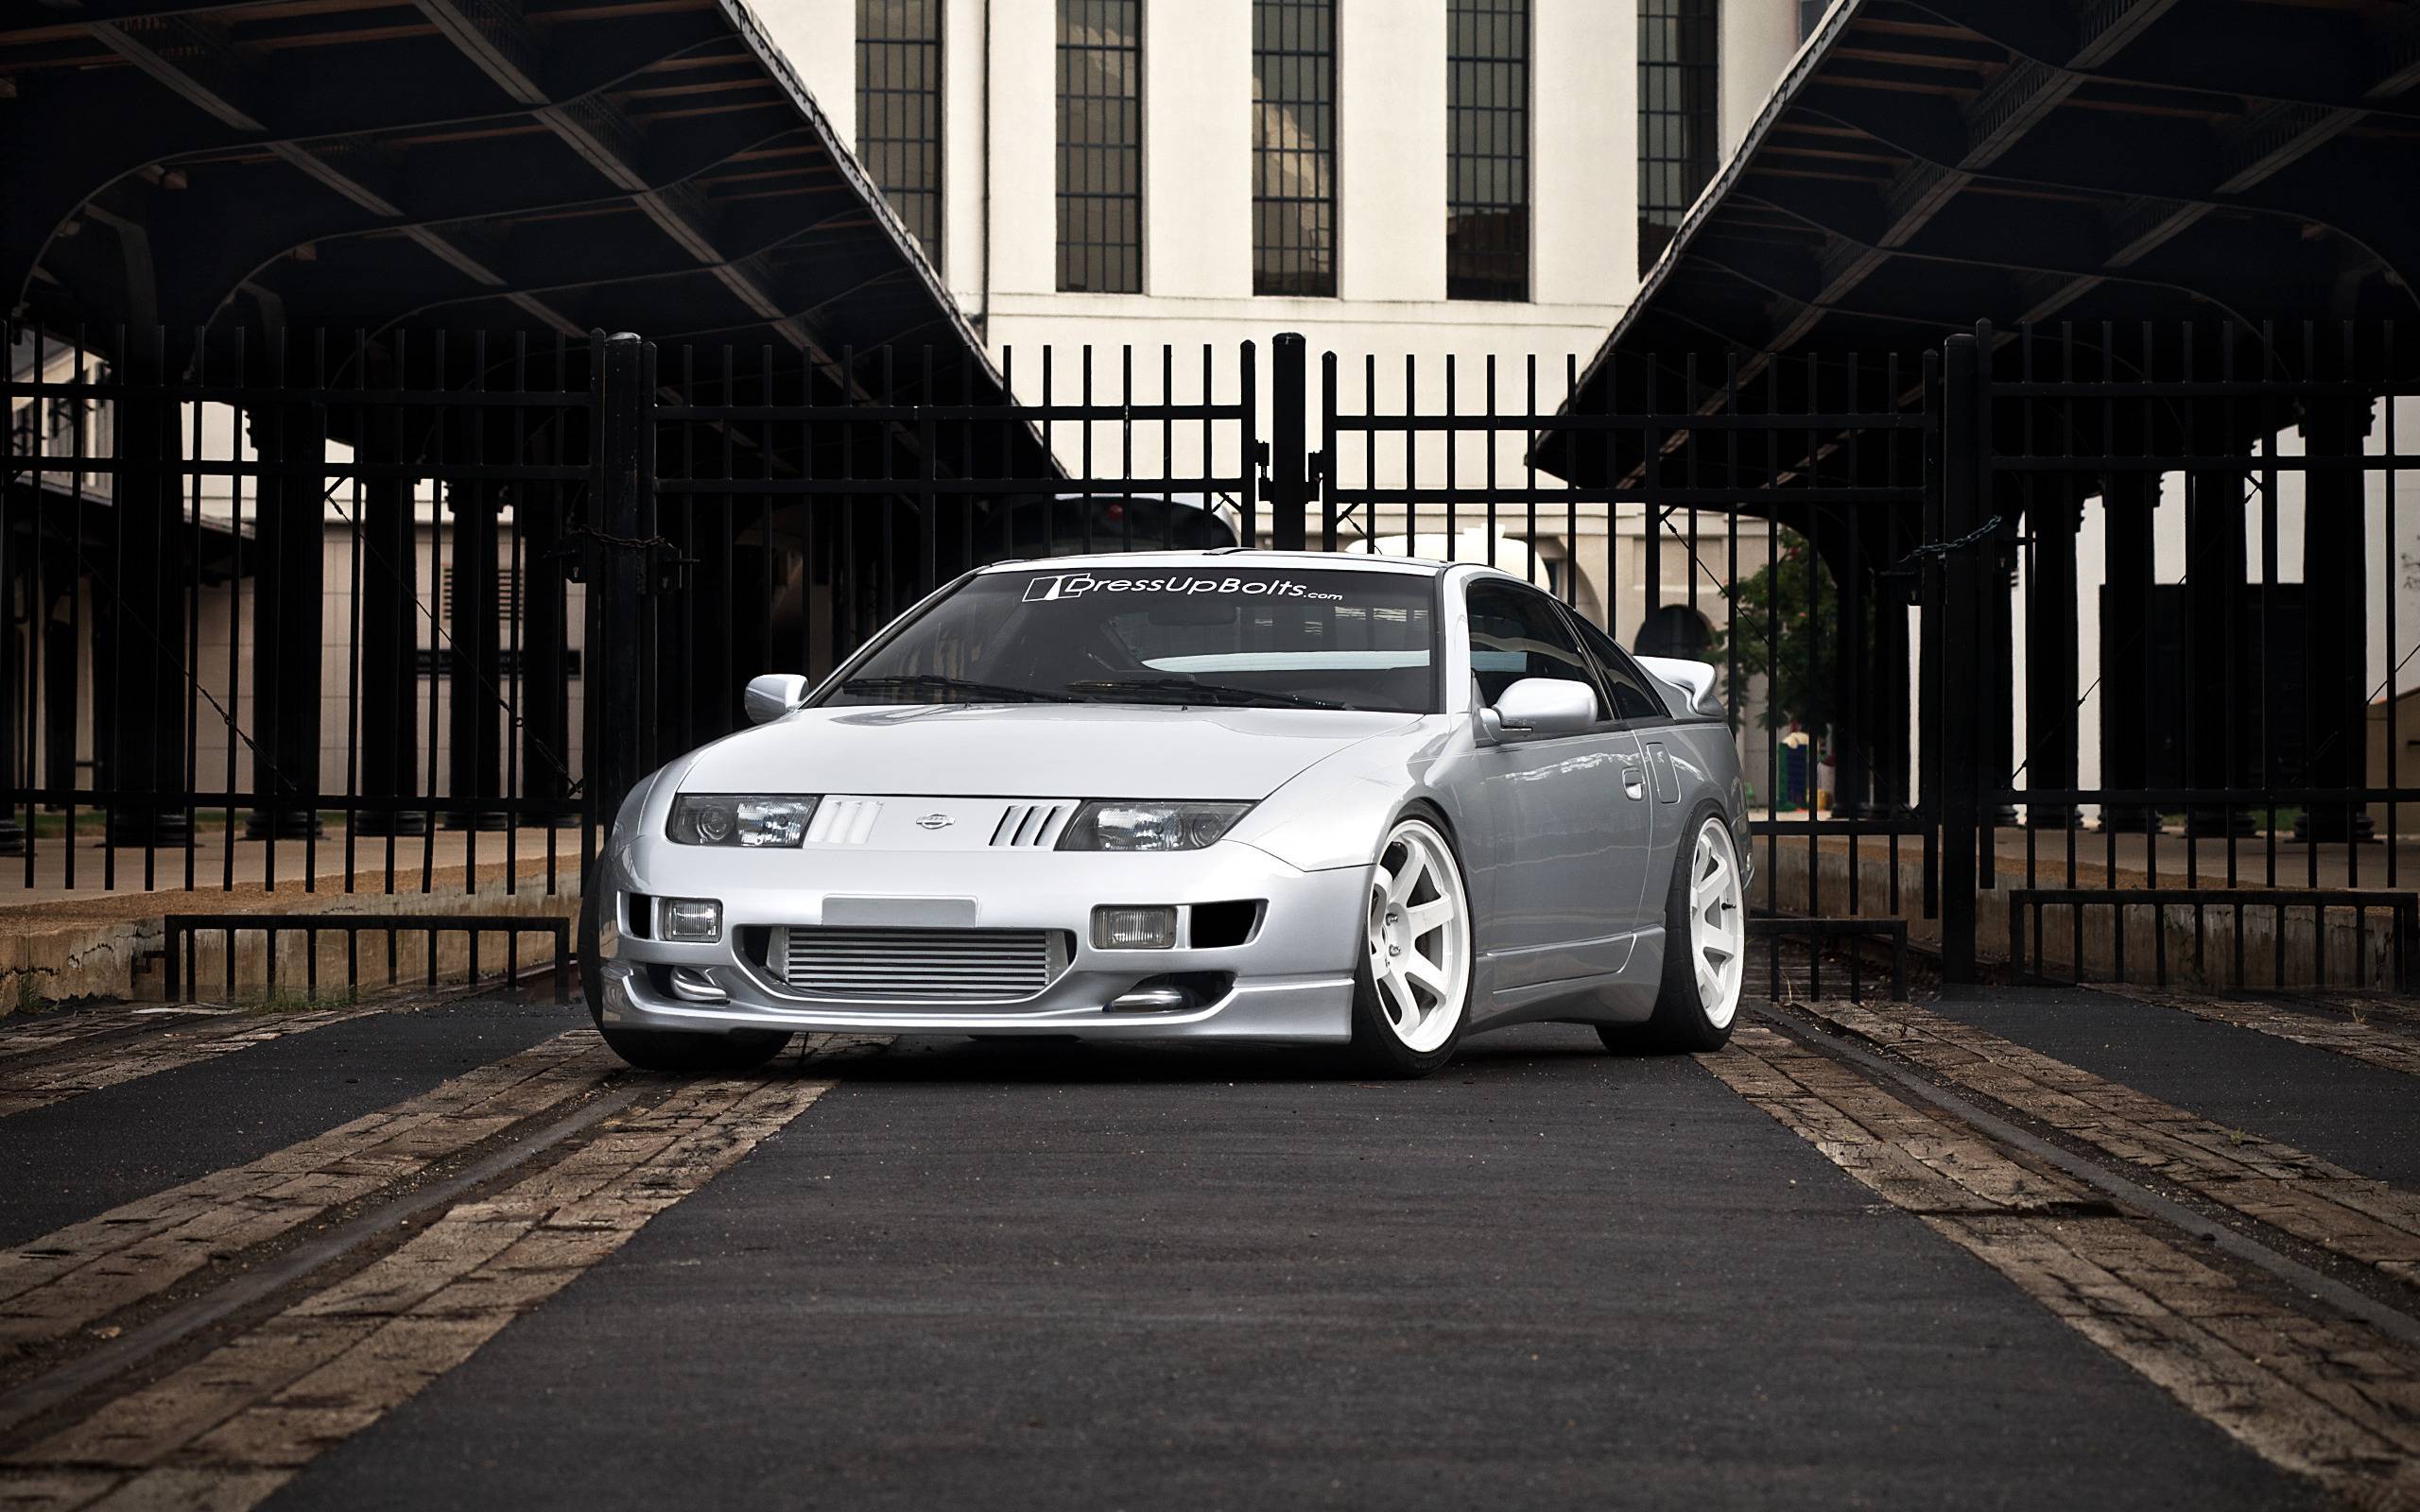 Nissan 300ZX wallpaper and image, picture, photo